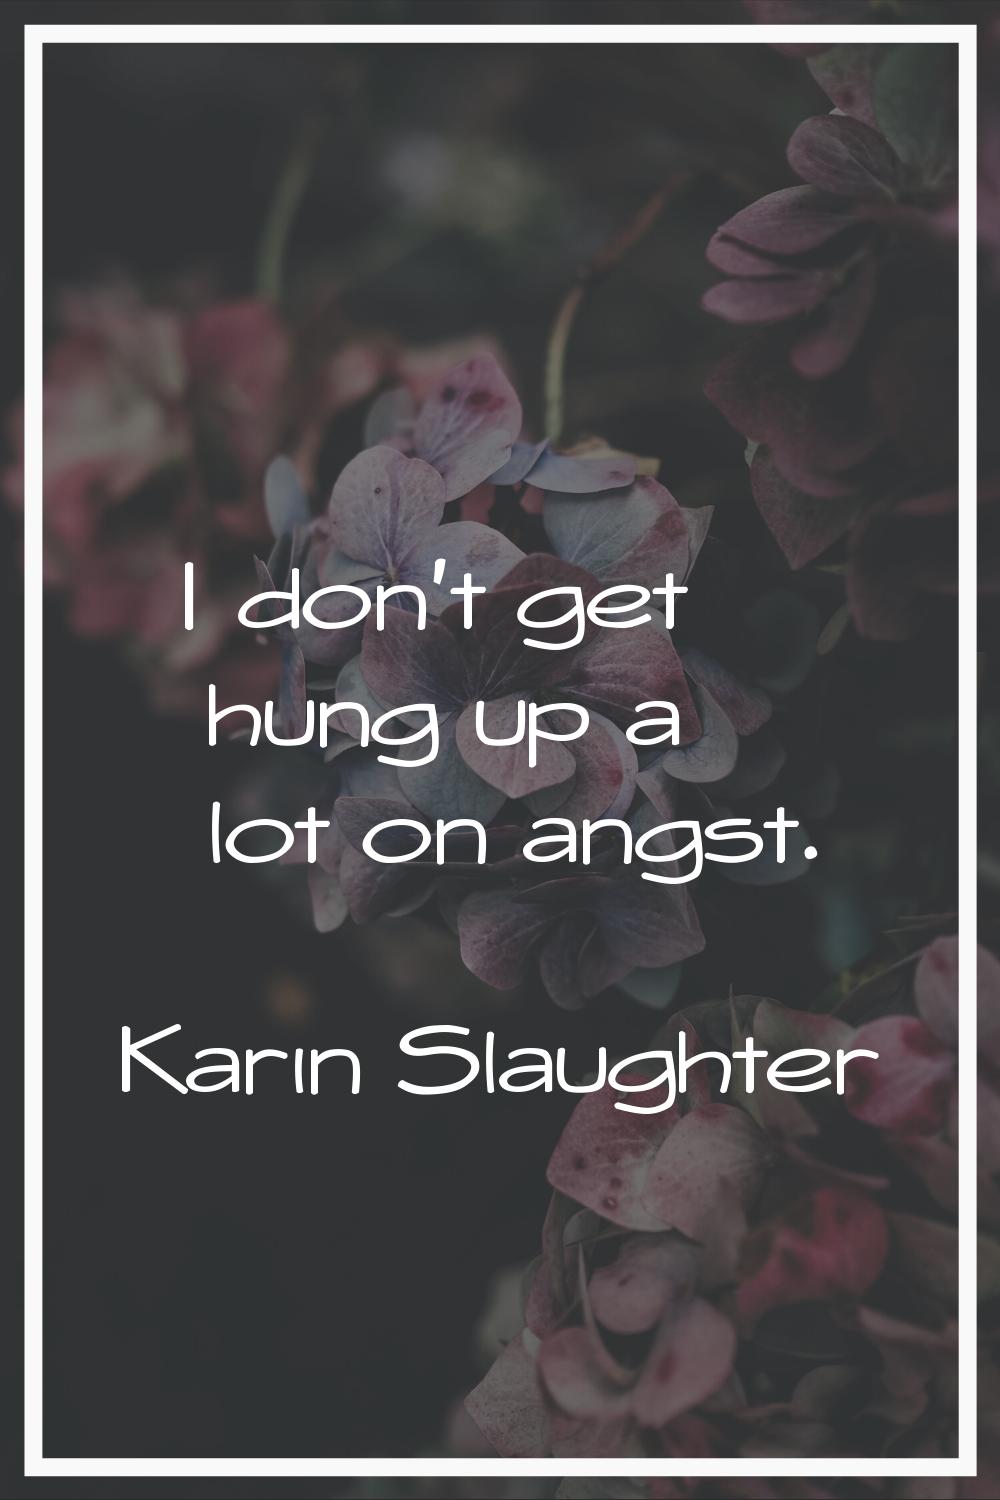 I don't get hung up a lot on angst.